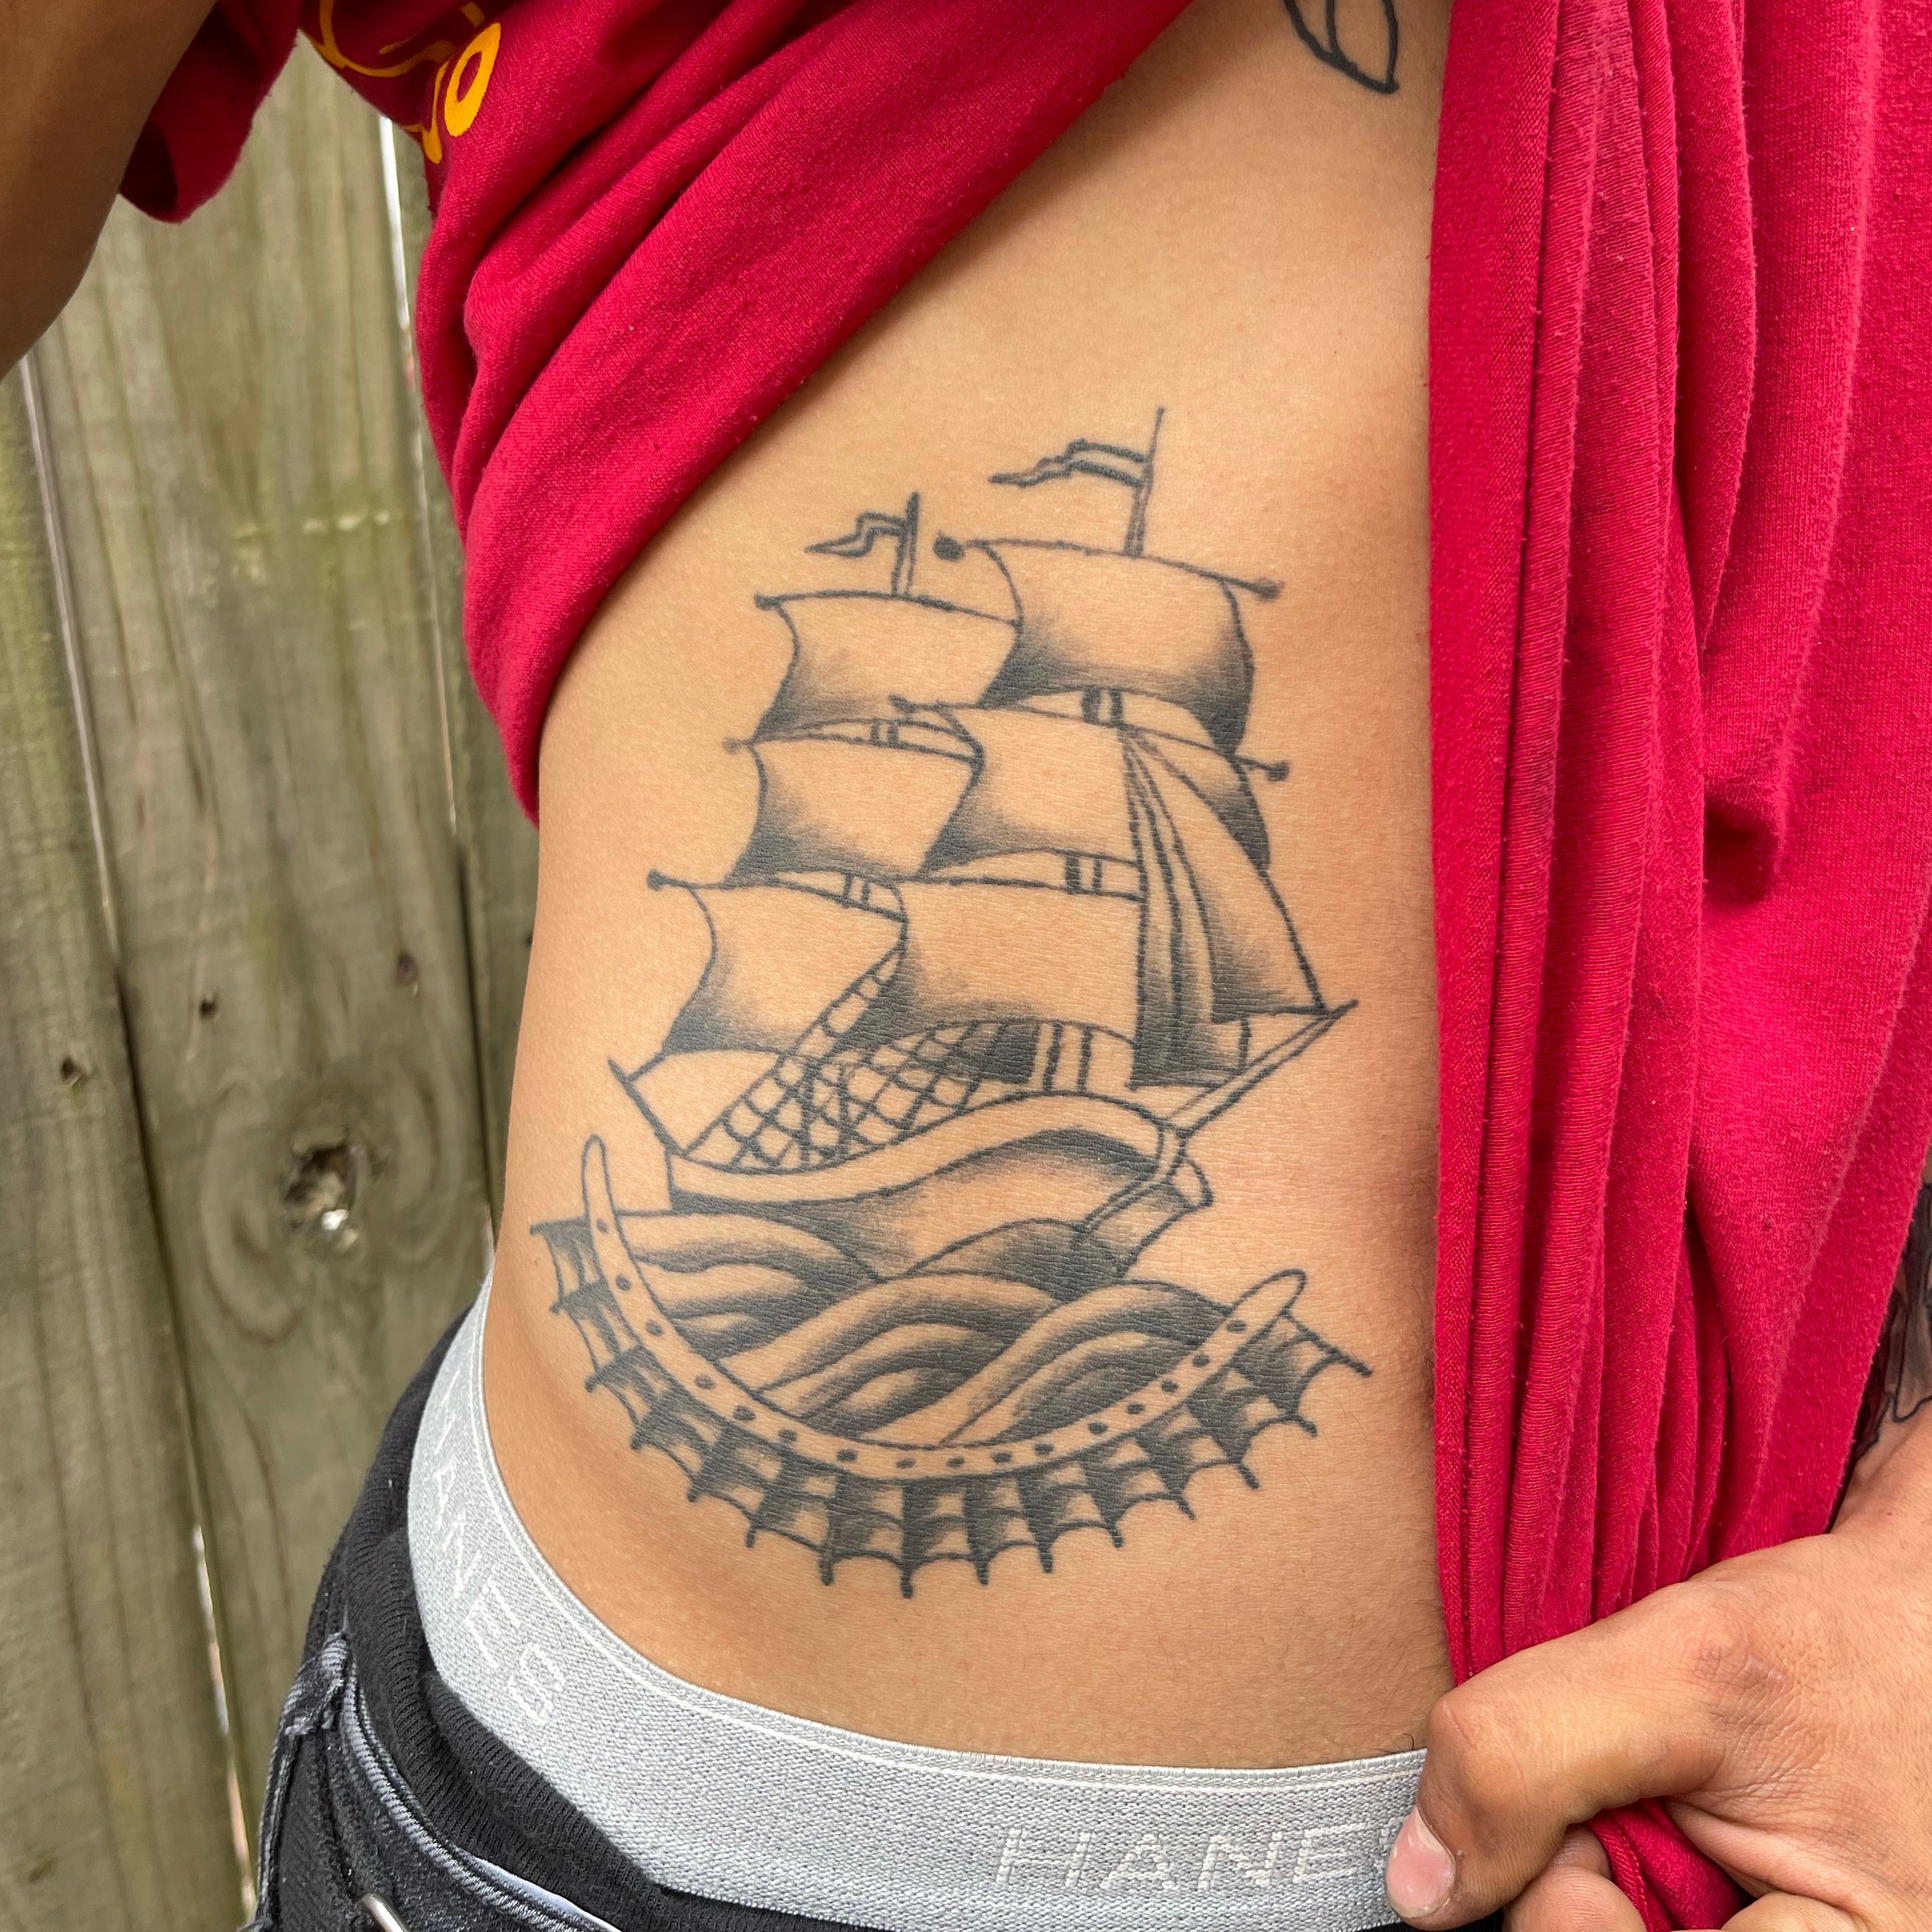 Antique Ship Tattoos To Convey Your Feelings Of Nostalgia - Cultura  Colectiva | Tattoos for guys, Sleeve tattoos, Ship tattoo